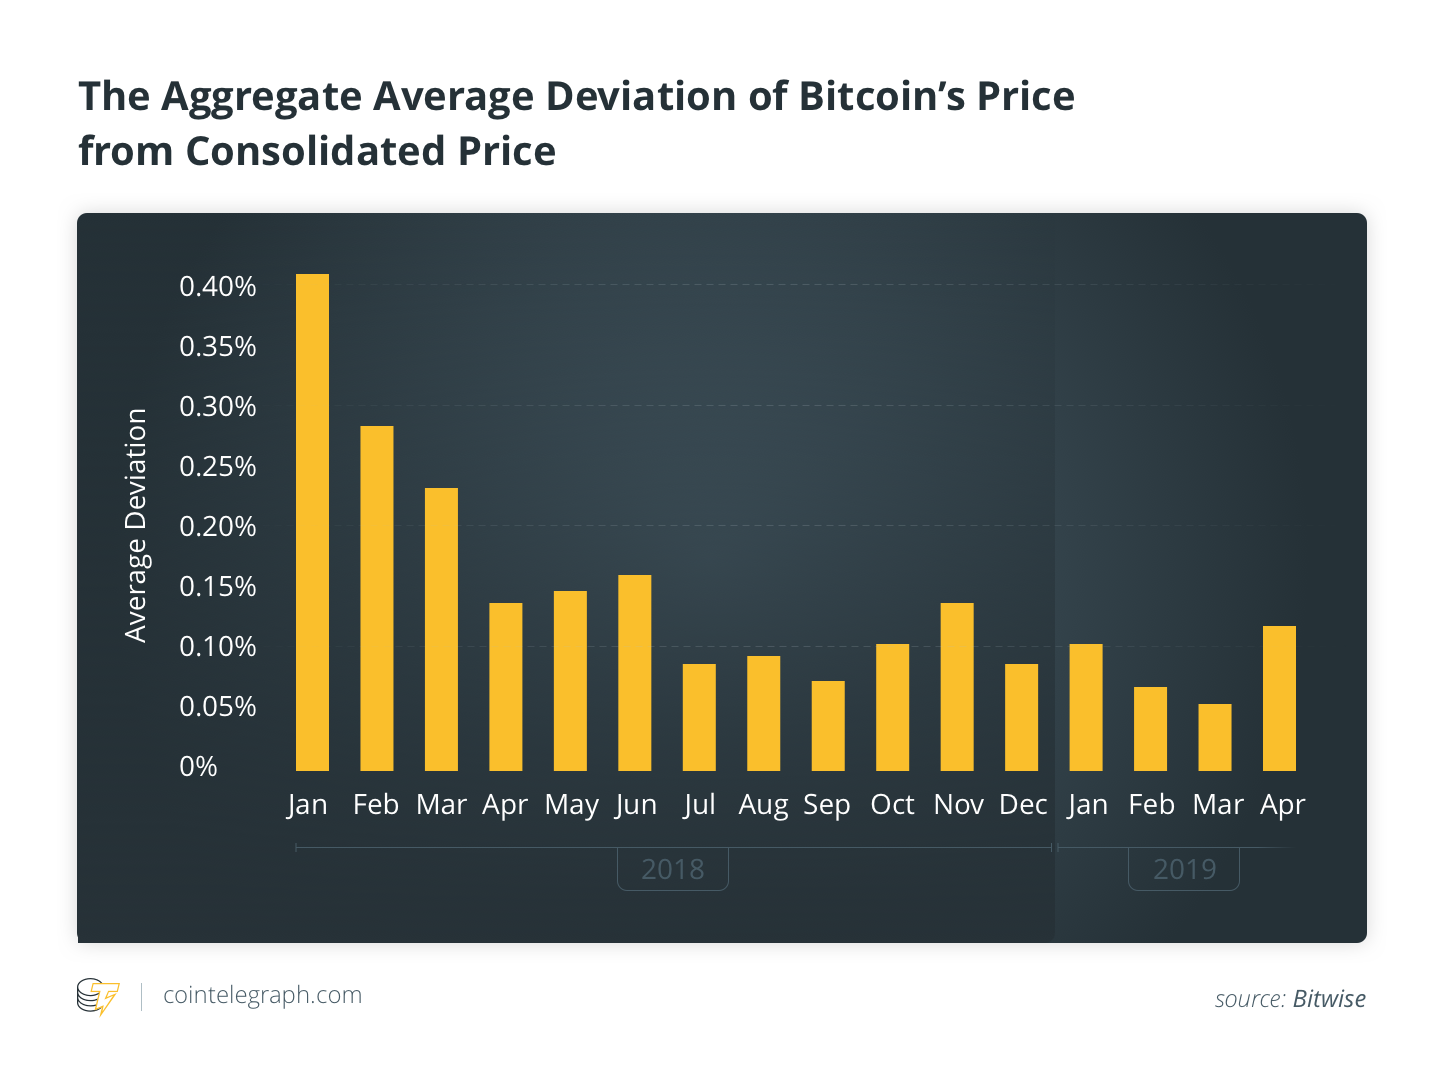 The Aggregate Average Deviation of Bitcoin's Price from Consolidated Price